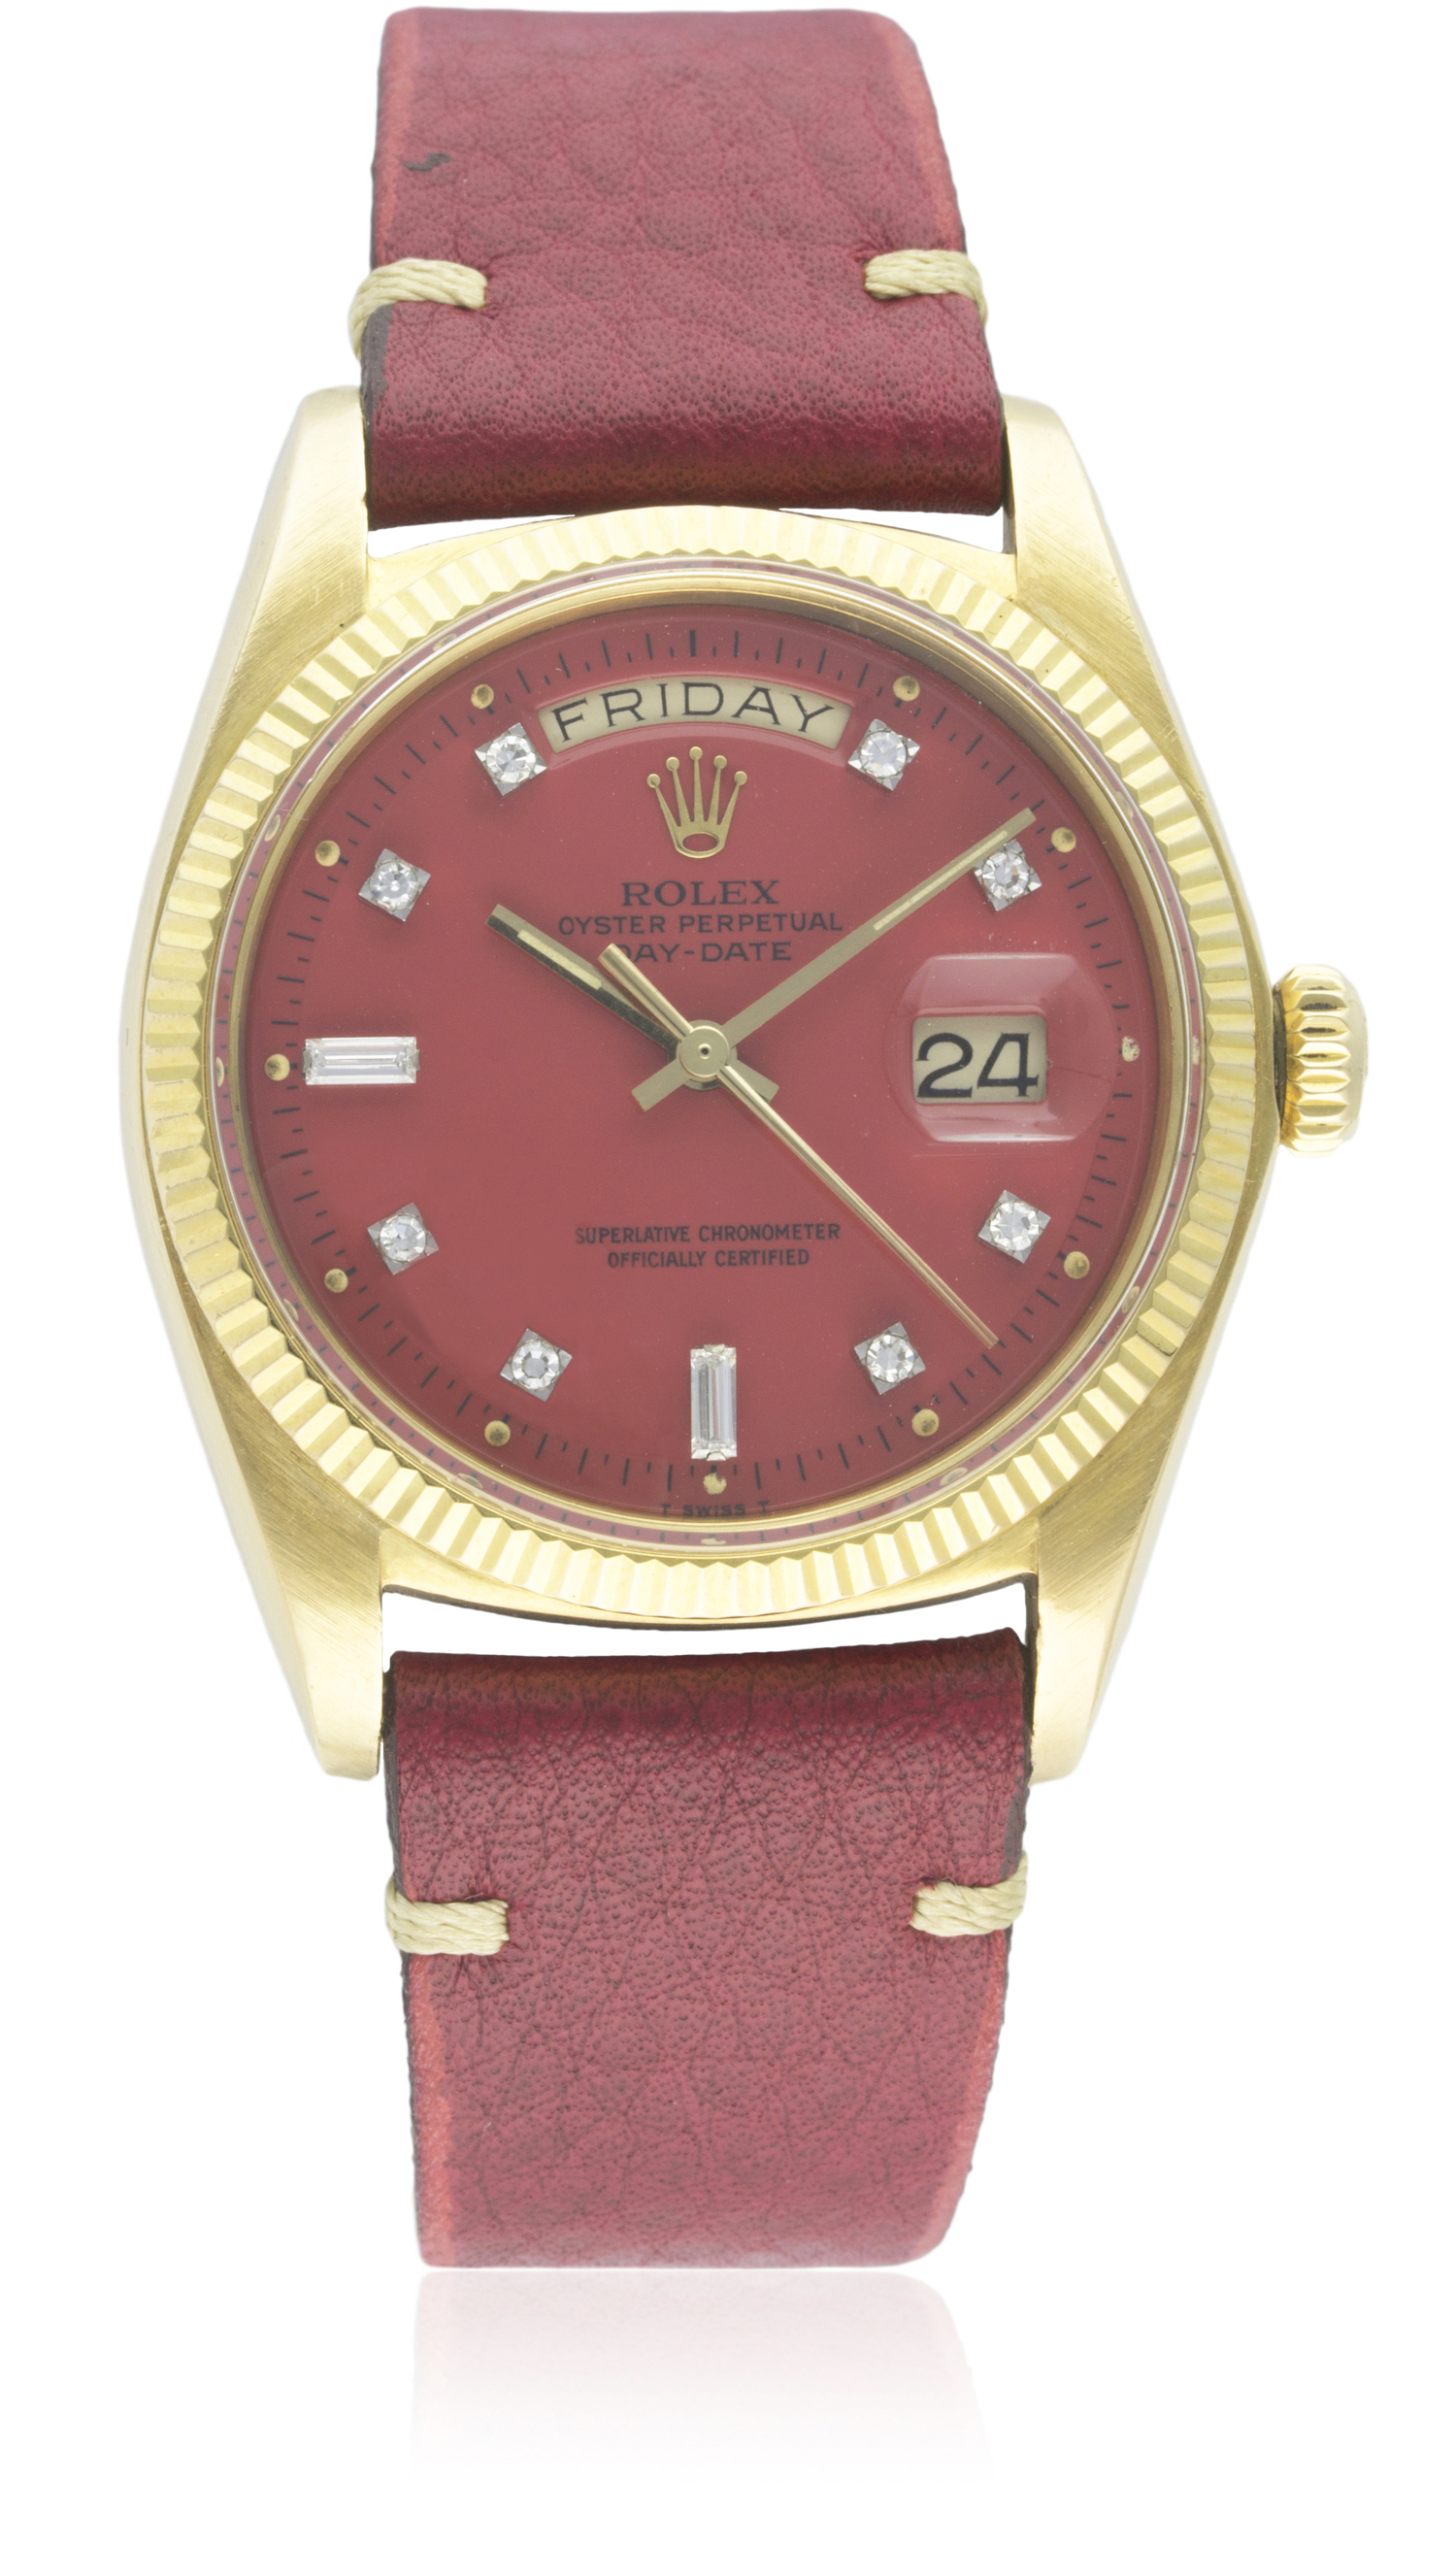 A FINE & RARE GENTLEMAN'S 18K SOLID GOLD ROLEX OYSTER PERPETUAL DAY DATE WRIST WATCH CIRCA 1971, - Image 2 of 2